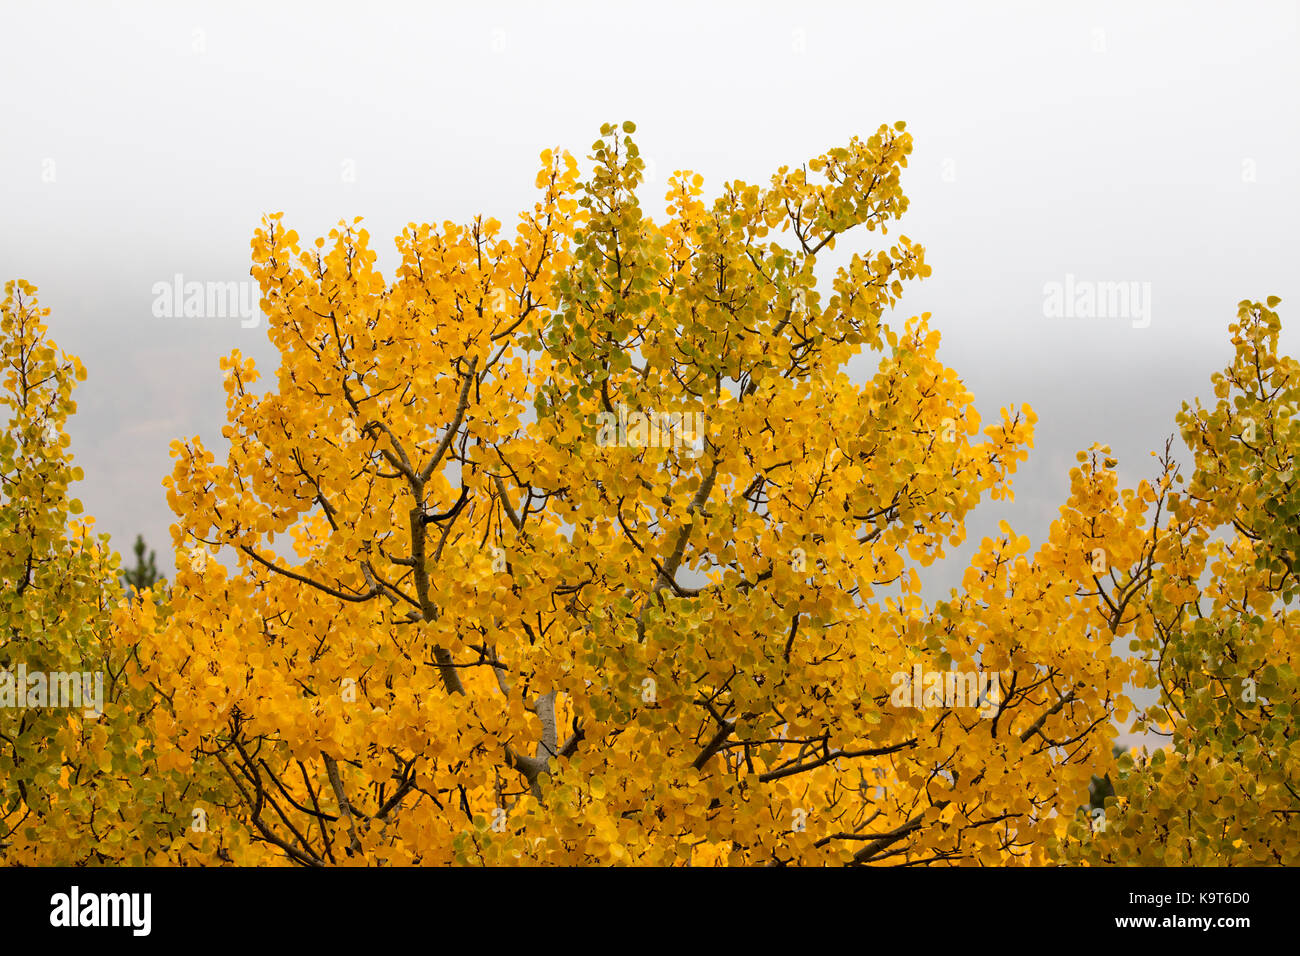 An aspen tree with intricate branches and golden leaves tipped with moisture on a foggy fall day in rural Montana. Stock Photo